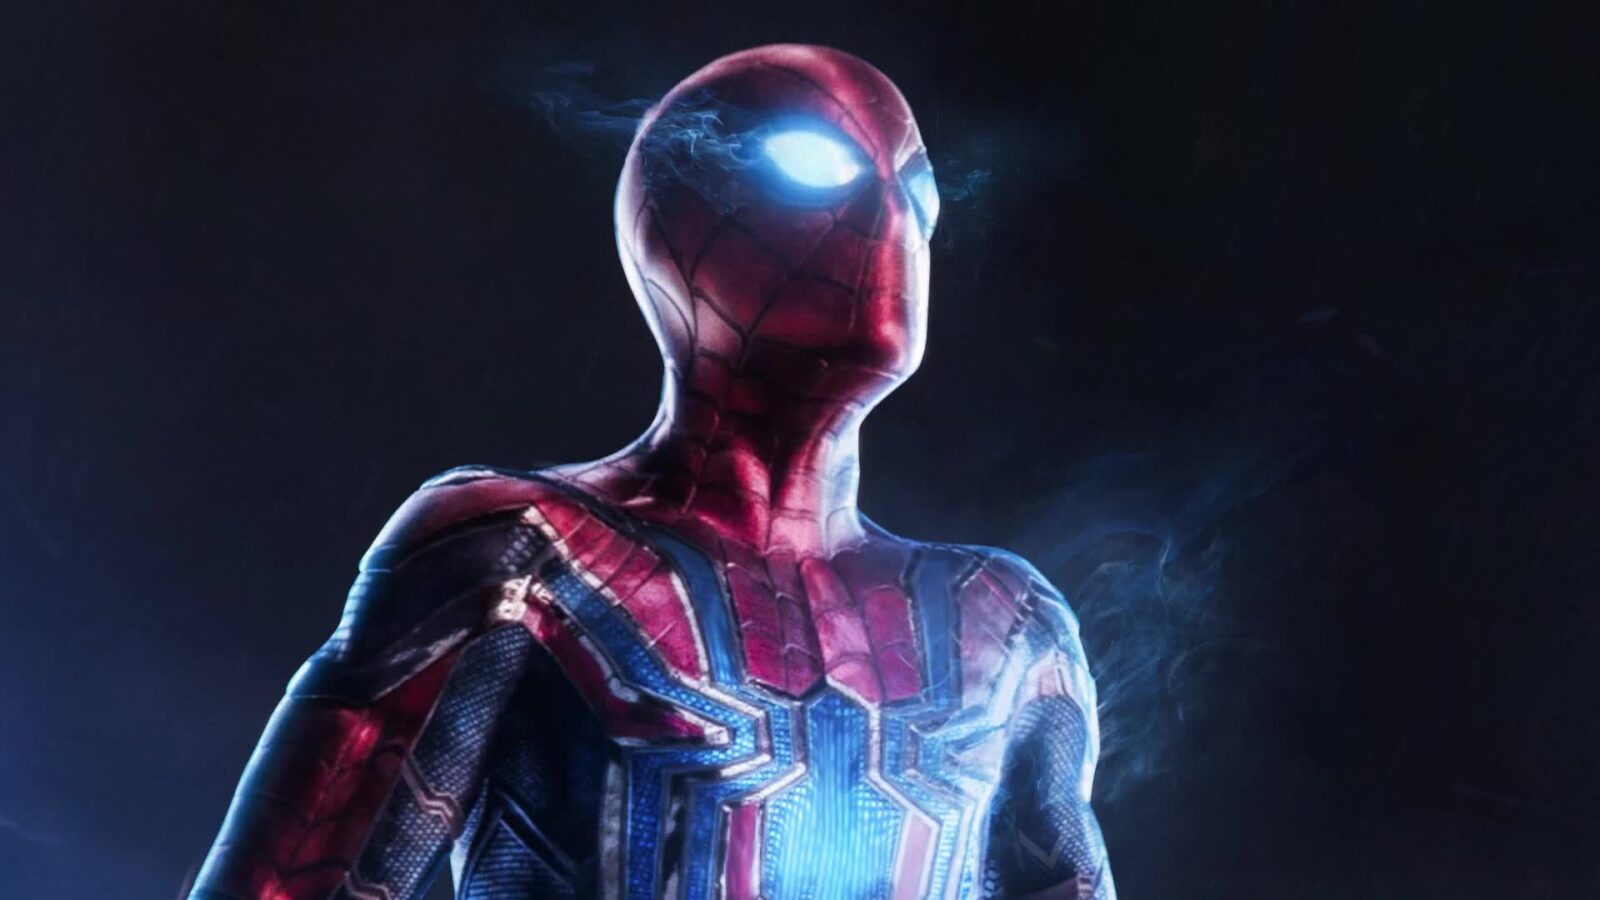 the amazing spider man full movie download mp4